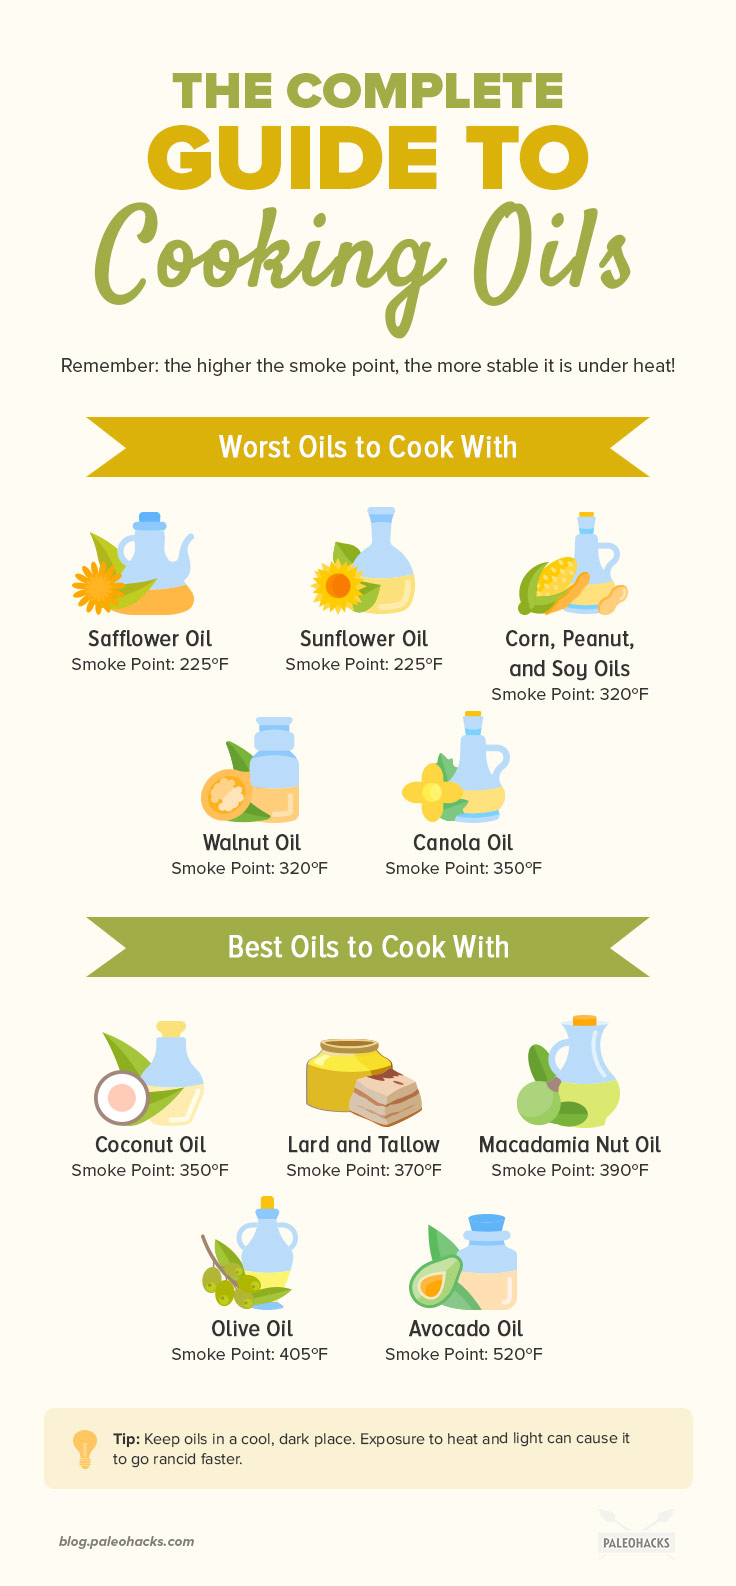 Read on to discover how to cook with the right oils, and how choosing your variety wisely can help reduce your risk for certain diseases.